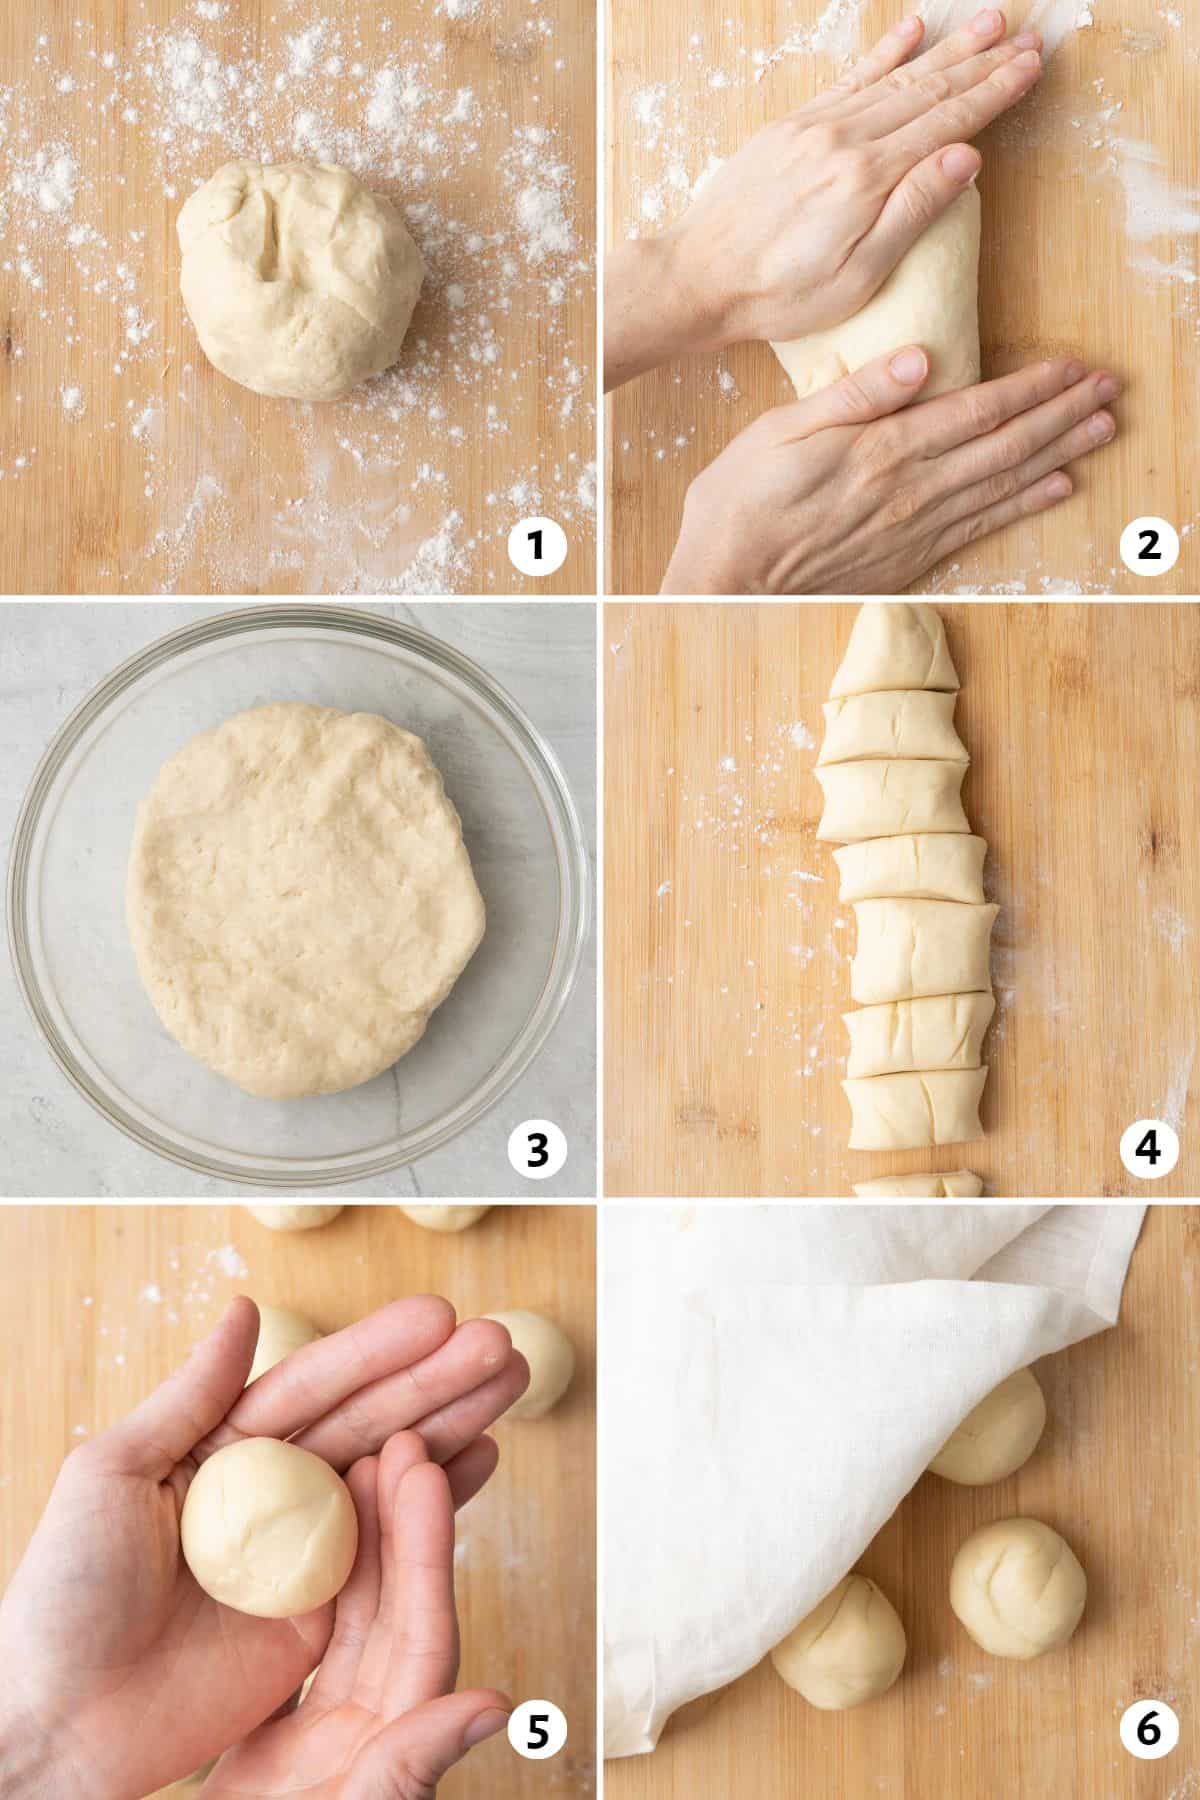 6 image collage preparing dough: 1- dough ball on floured surface, 2- hands kneading dough, 3- dough resting in a bowl, 4- after resting returned to floured surface cut into 8 equal pieces, 5- hands rolling into a dough ball, 6- dough balls covered with a towel.